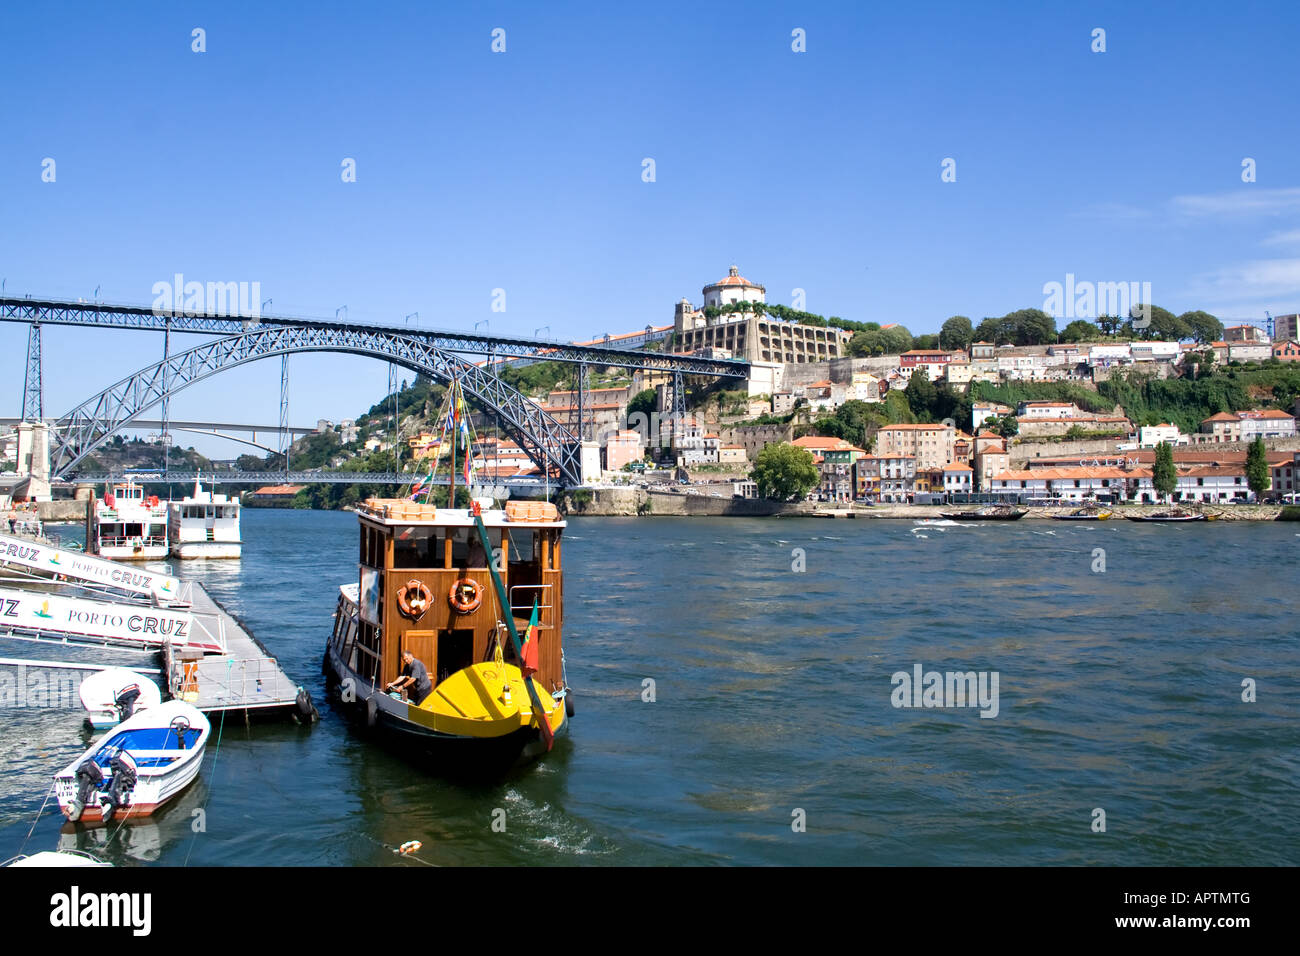 Boat used to make cruises in the Douro River at Porto (Portugal) using an adapted Rabelo Boat. D. Luis I bridge seen in back. Stock Photo